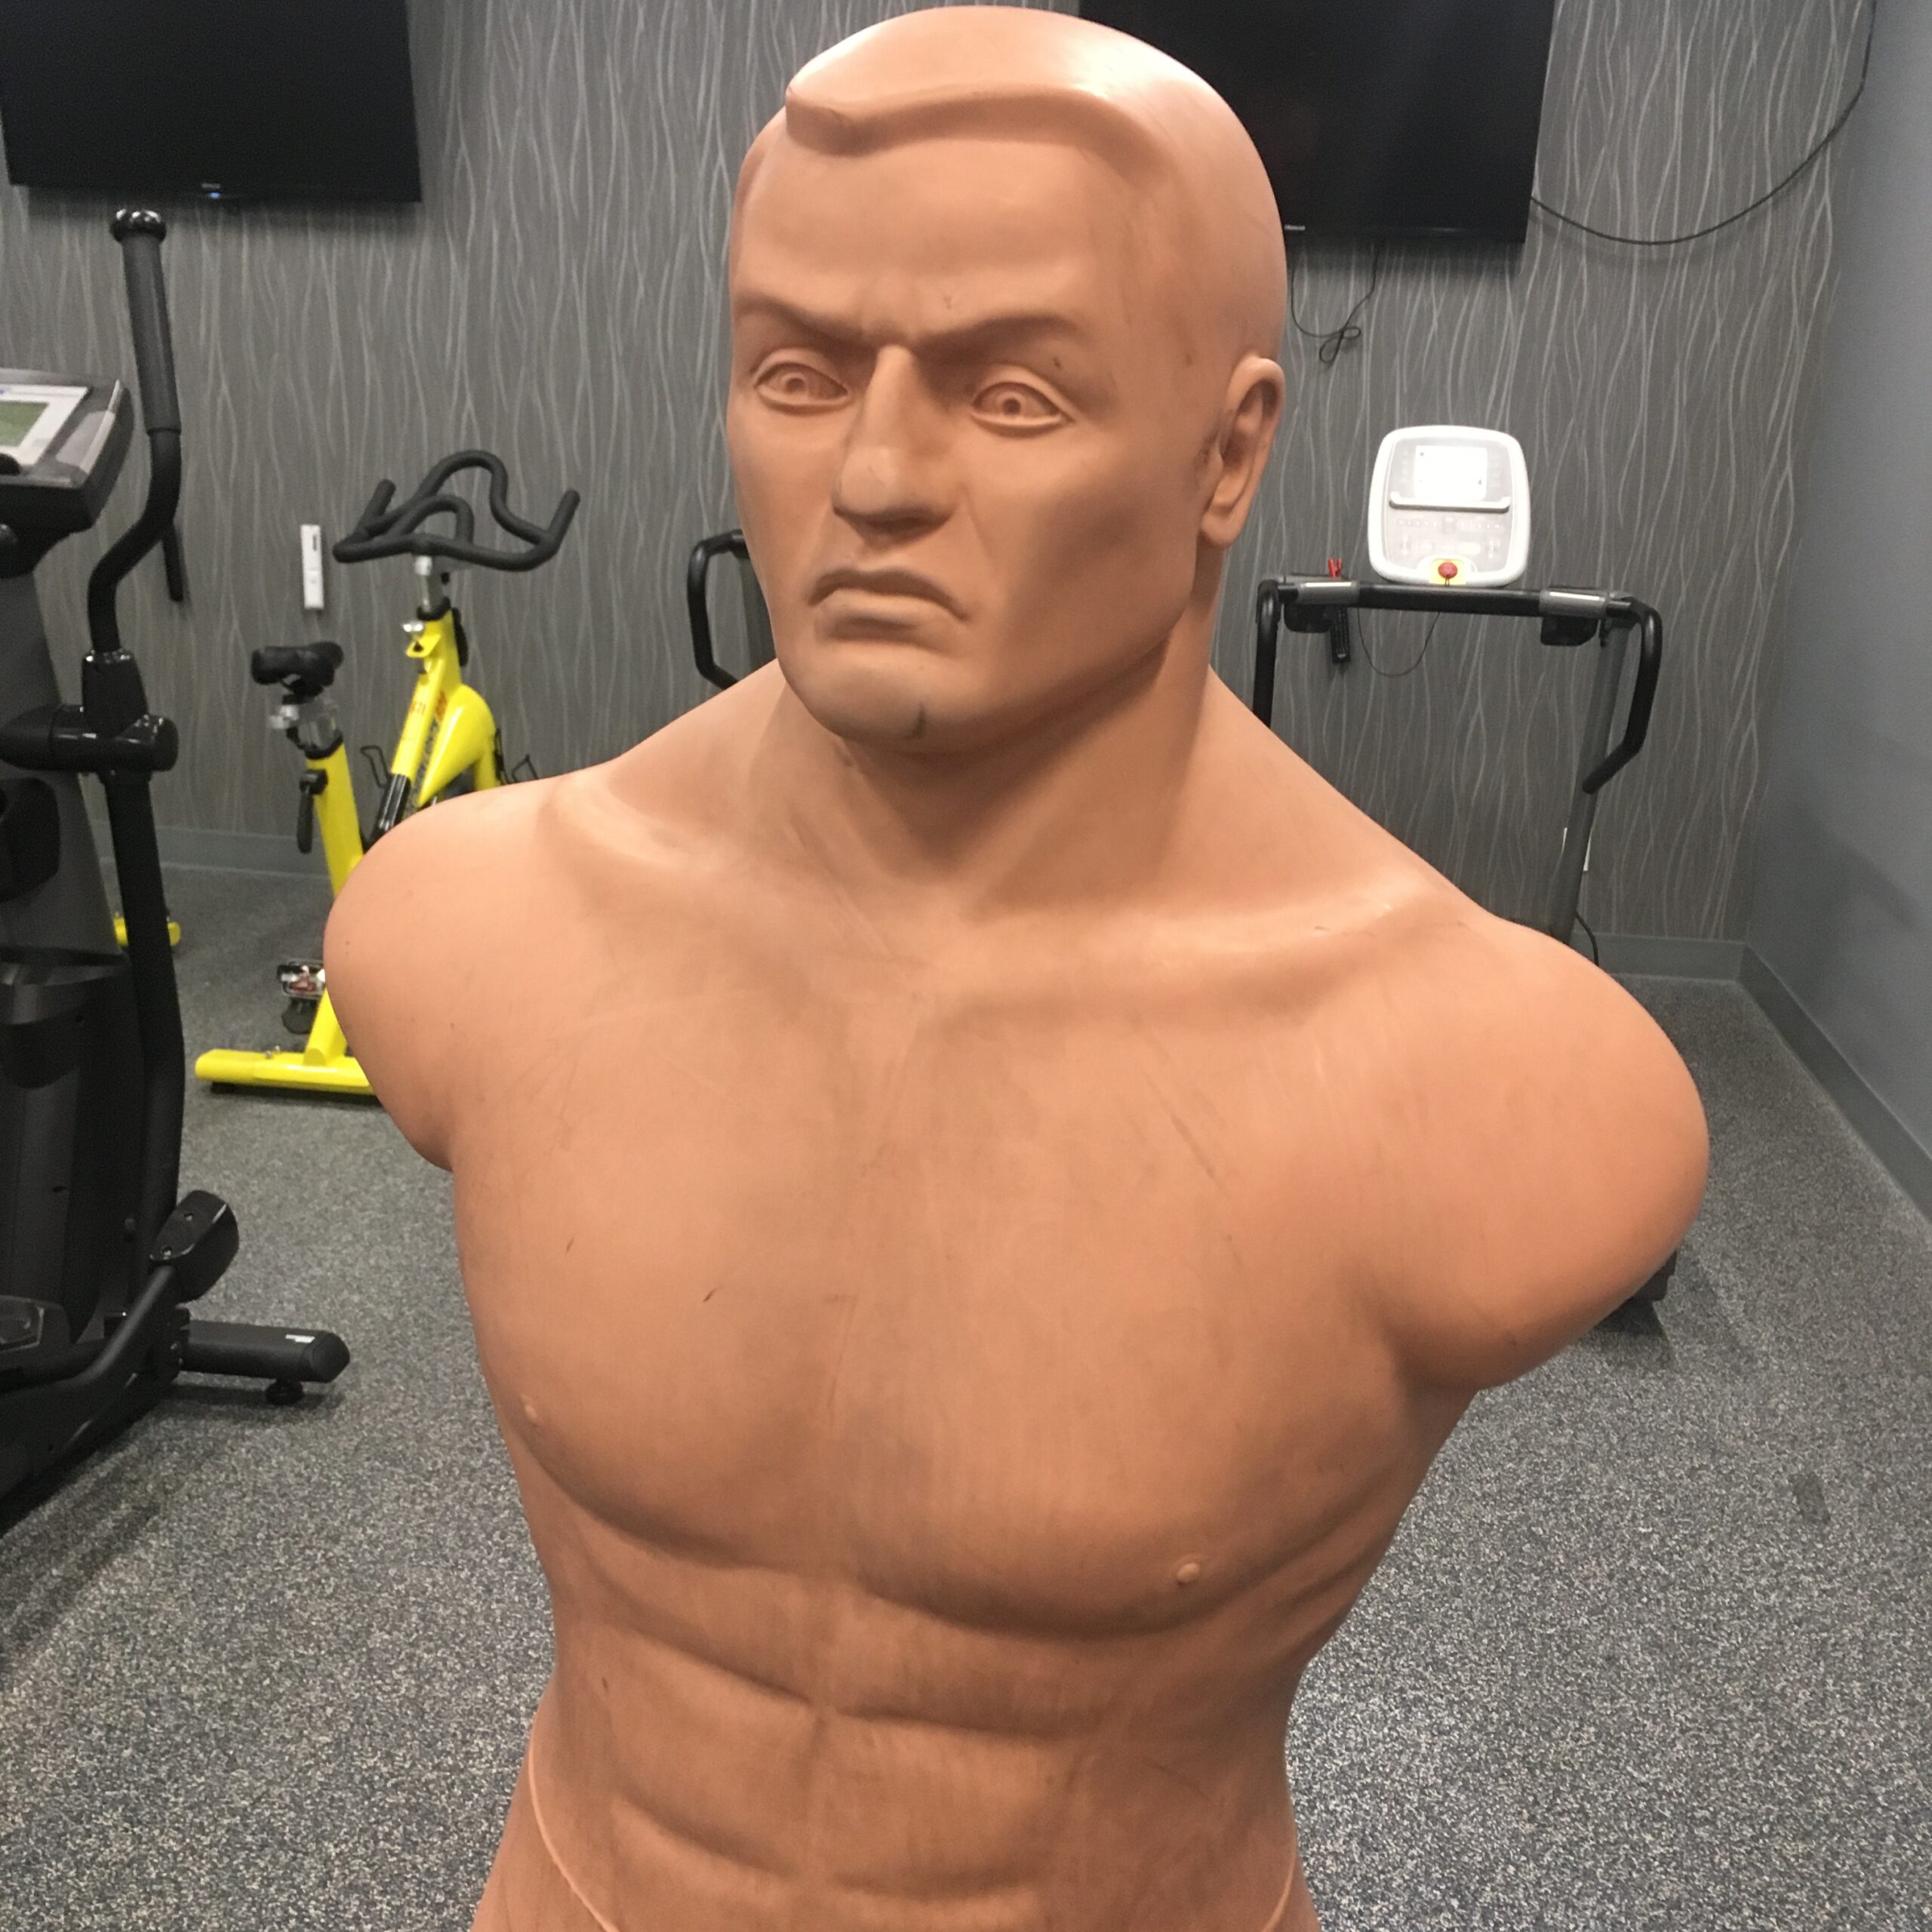 A male mannequin head and torso posed in front of gym equipement